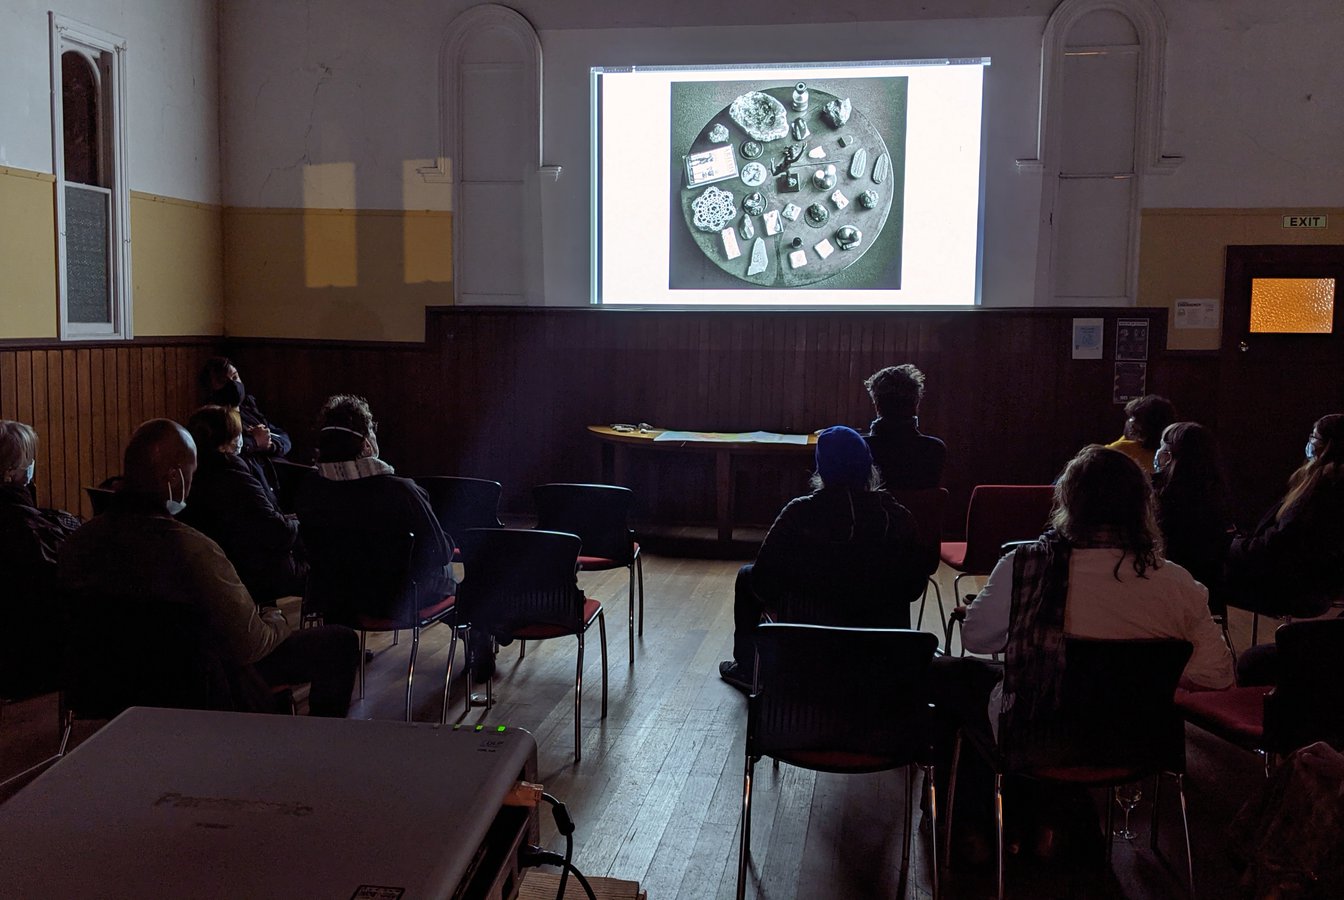 A photo of a dark hall interior, with a seated audience looking at an image projected onto the far wall. Photo courtesy of Lisa Sammut.